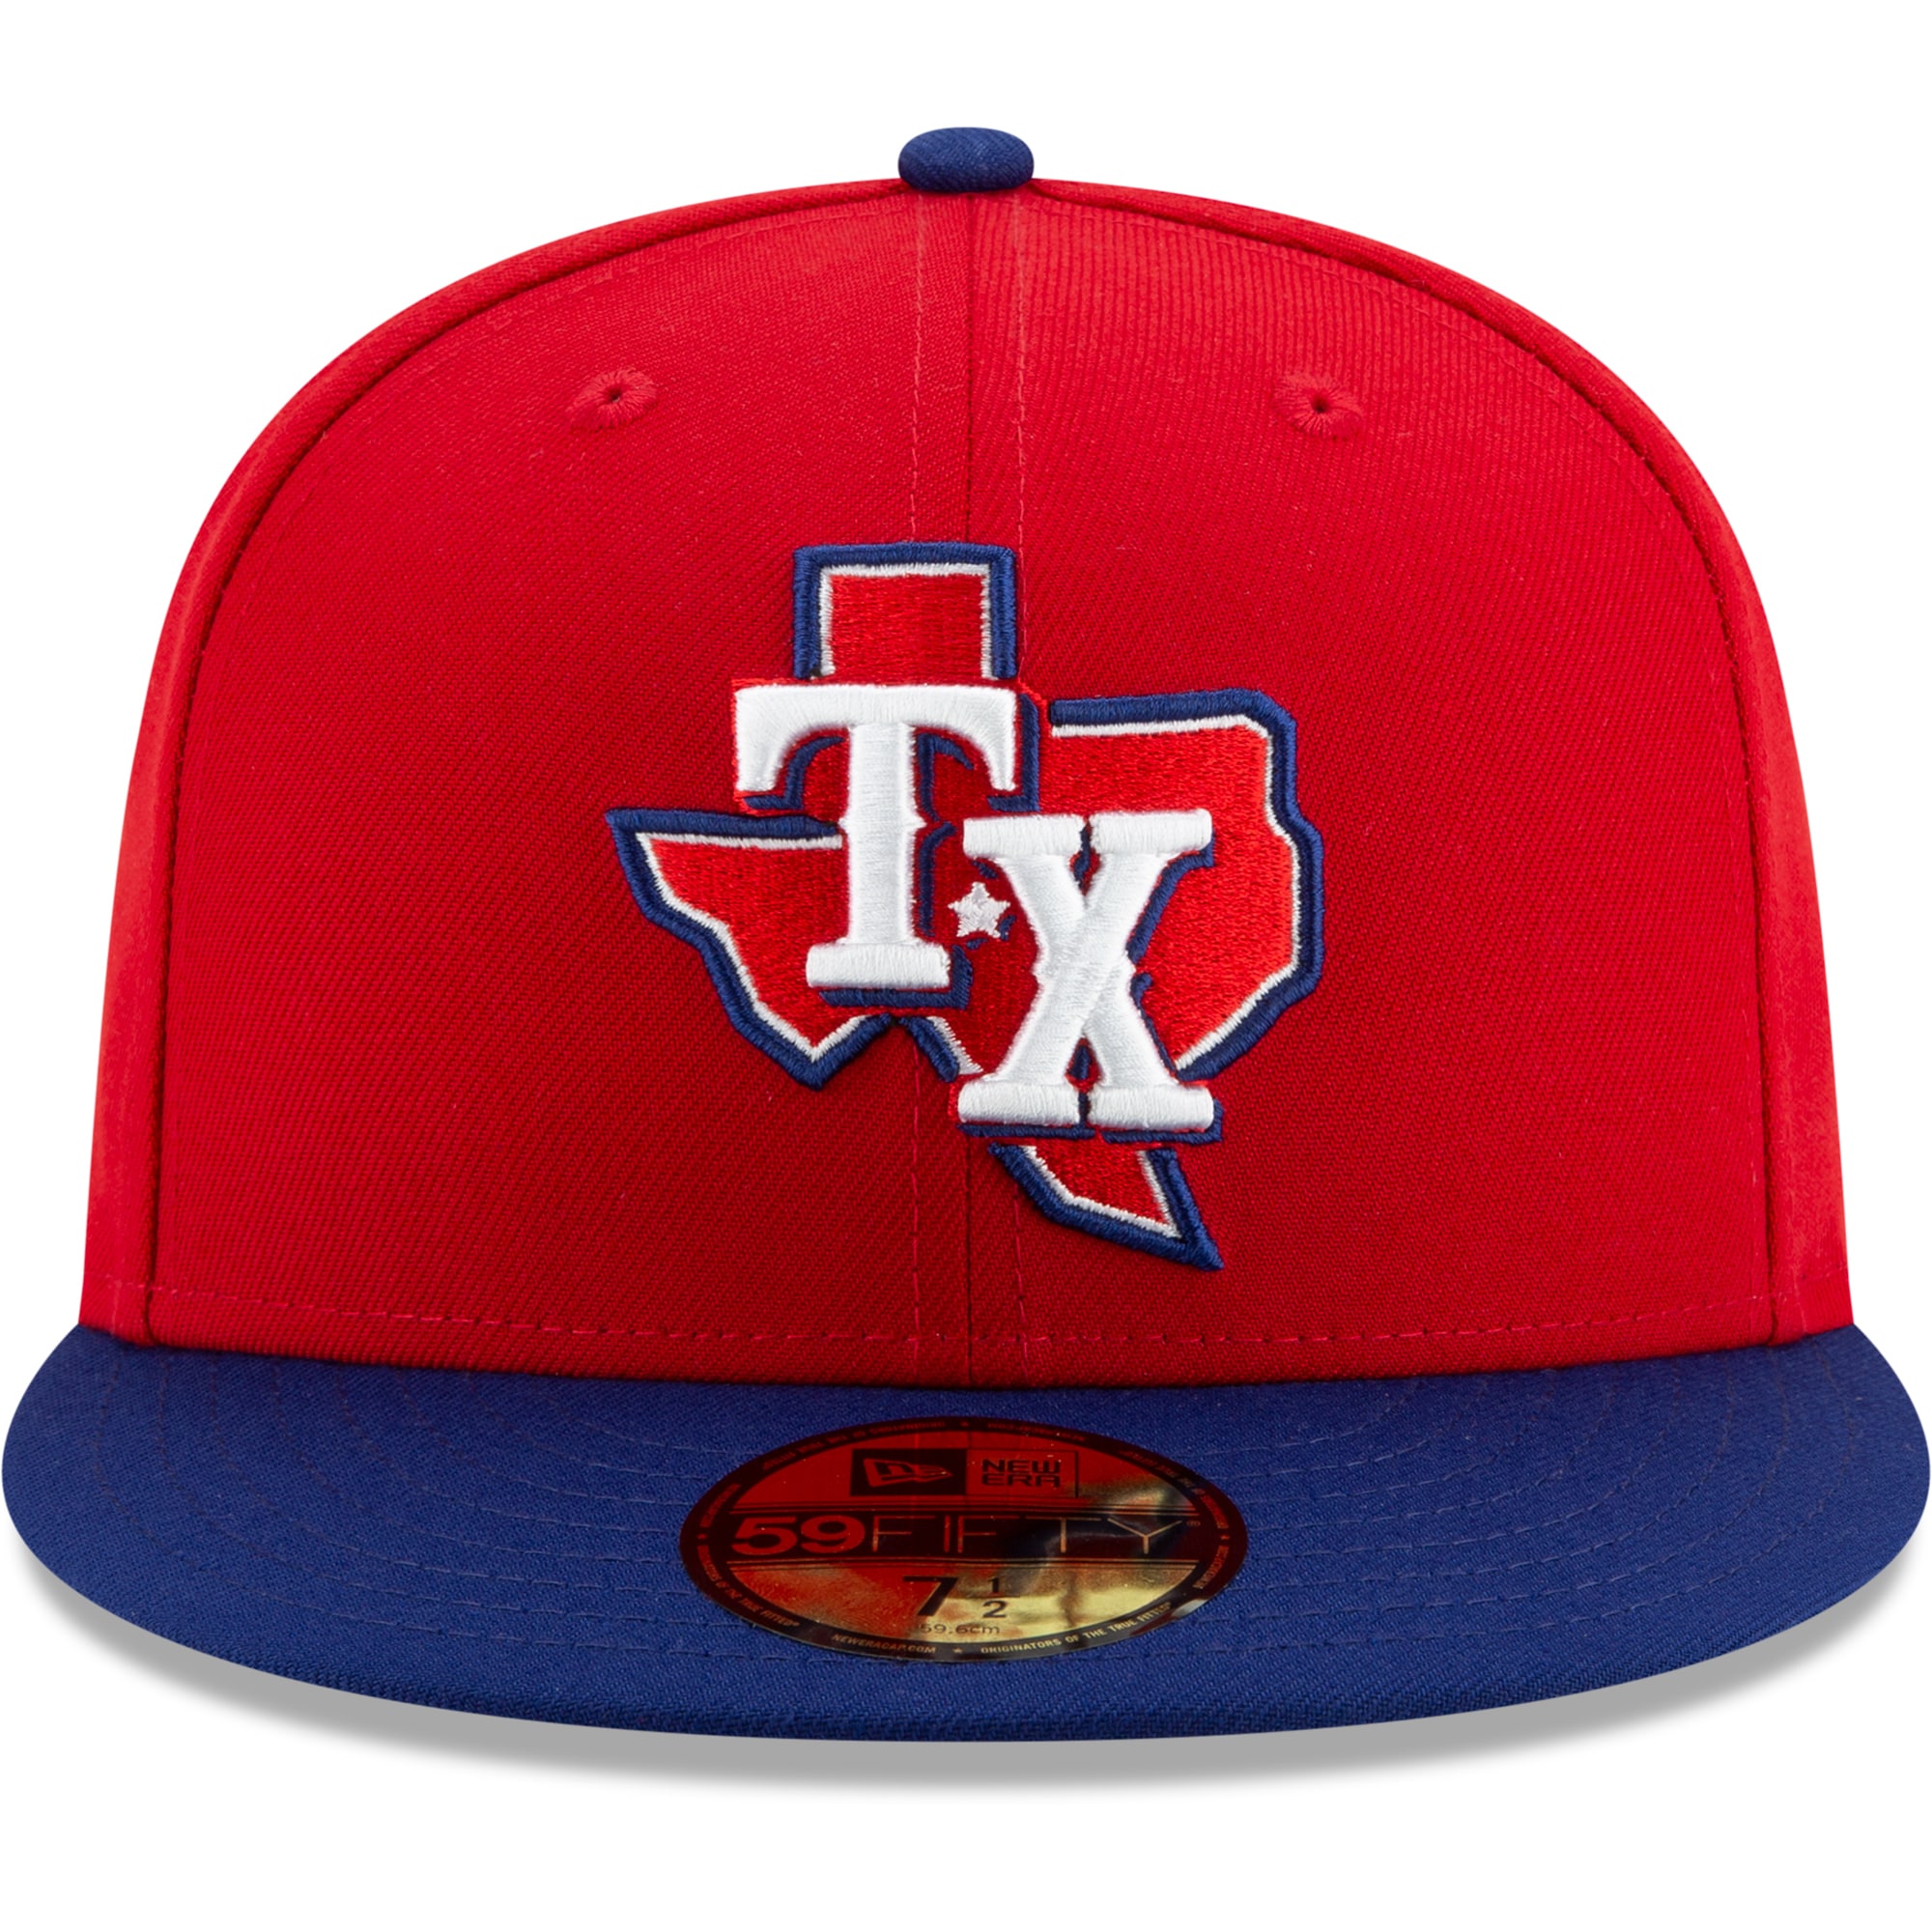 Men's New Era Red/Royal Texas Rangers 2020 Alternate 3 Authentic Collection On Field 59FIFTY Fitted Hat - image 2 of 4